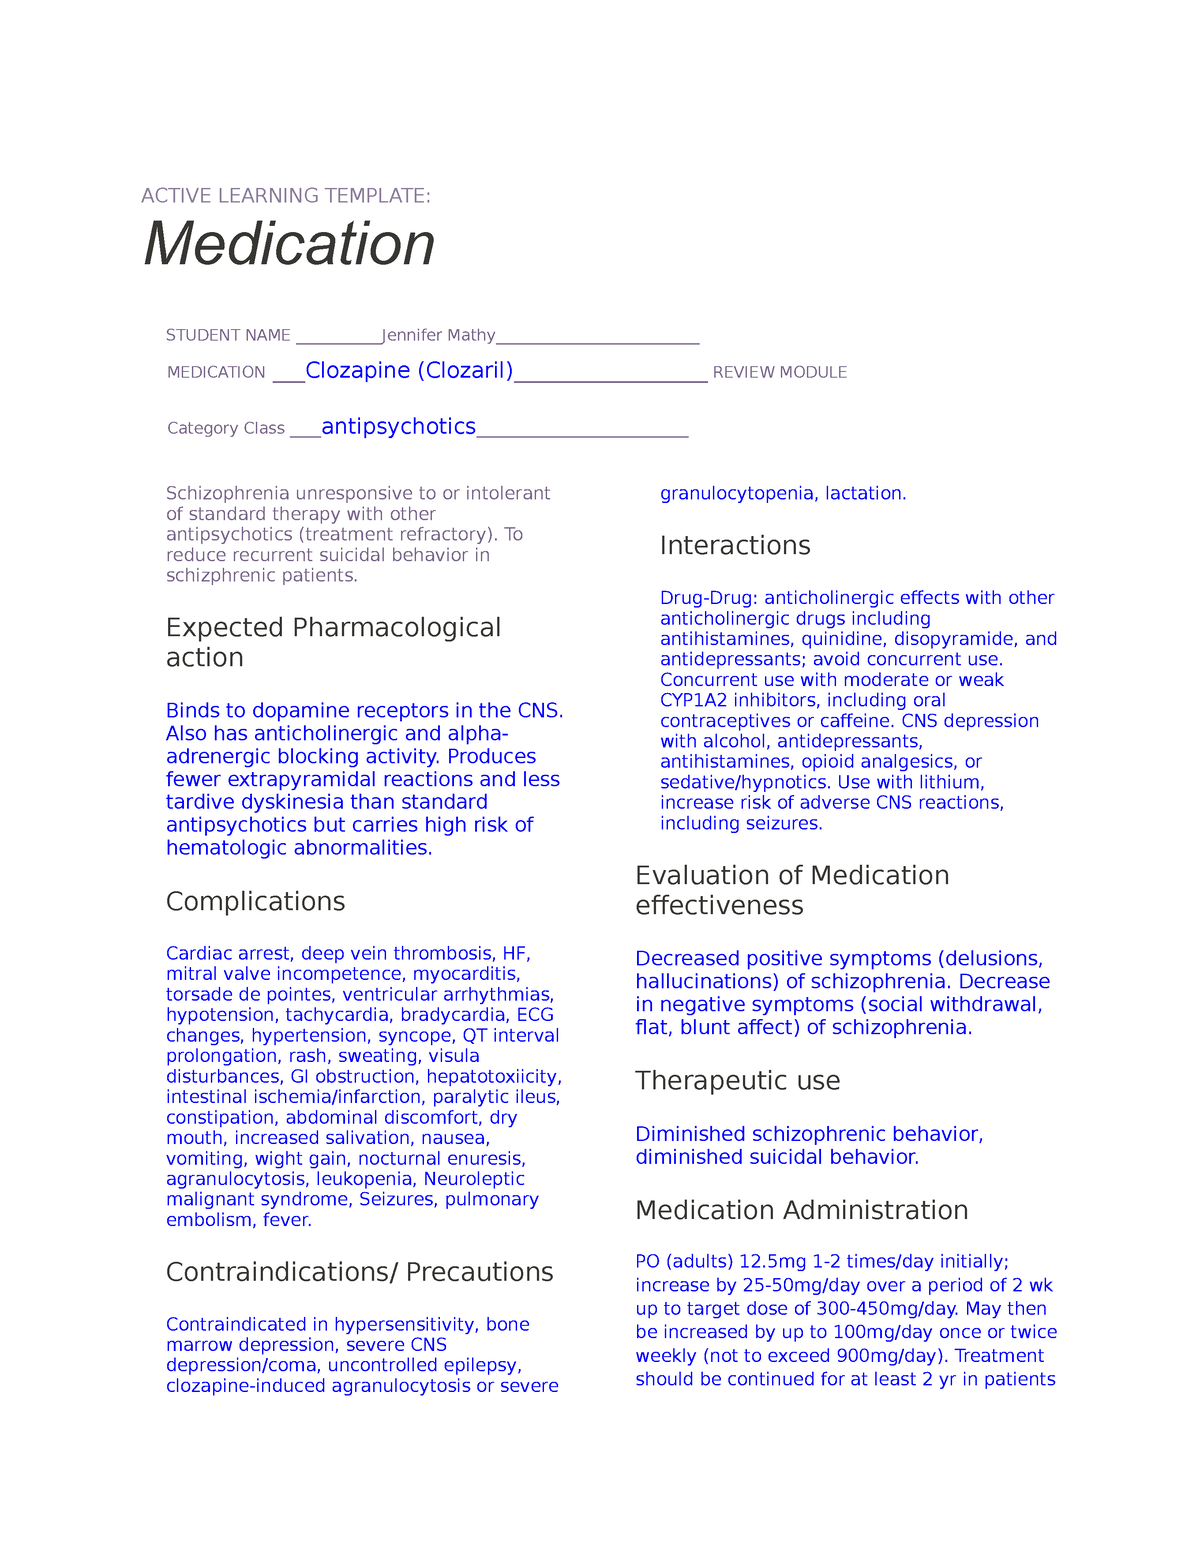 Clozapine (Clozaril) MEds ACTIVE LEARNING TEMPLATE Medication